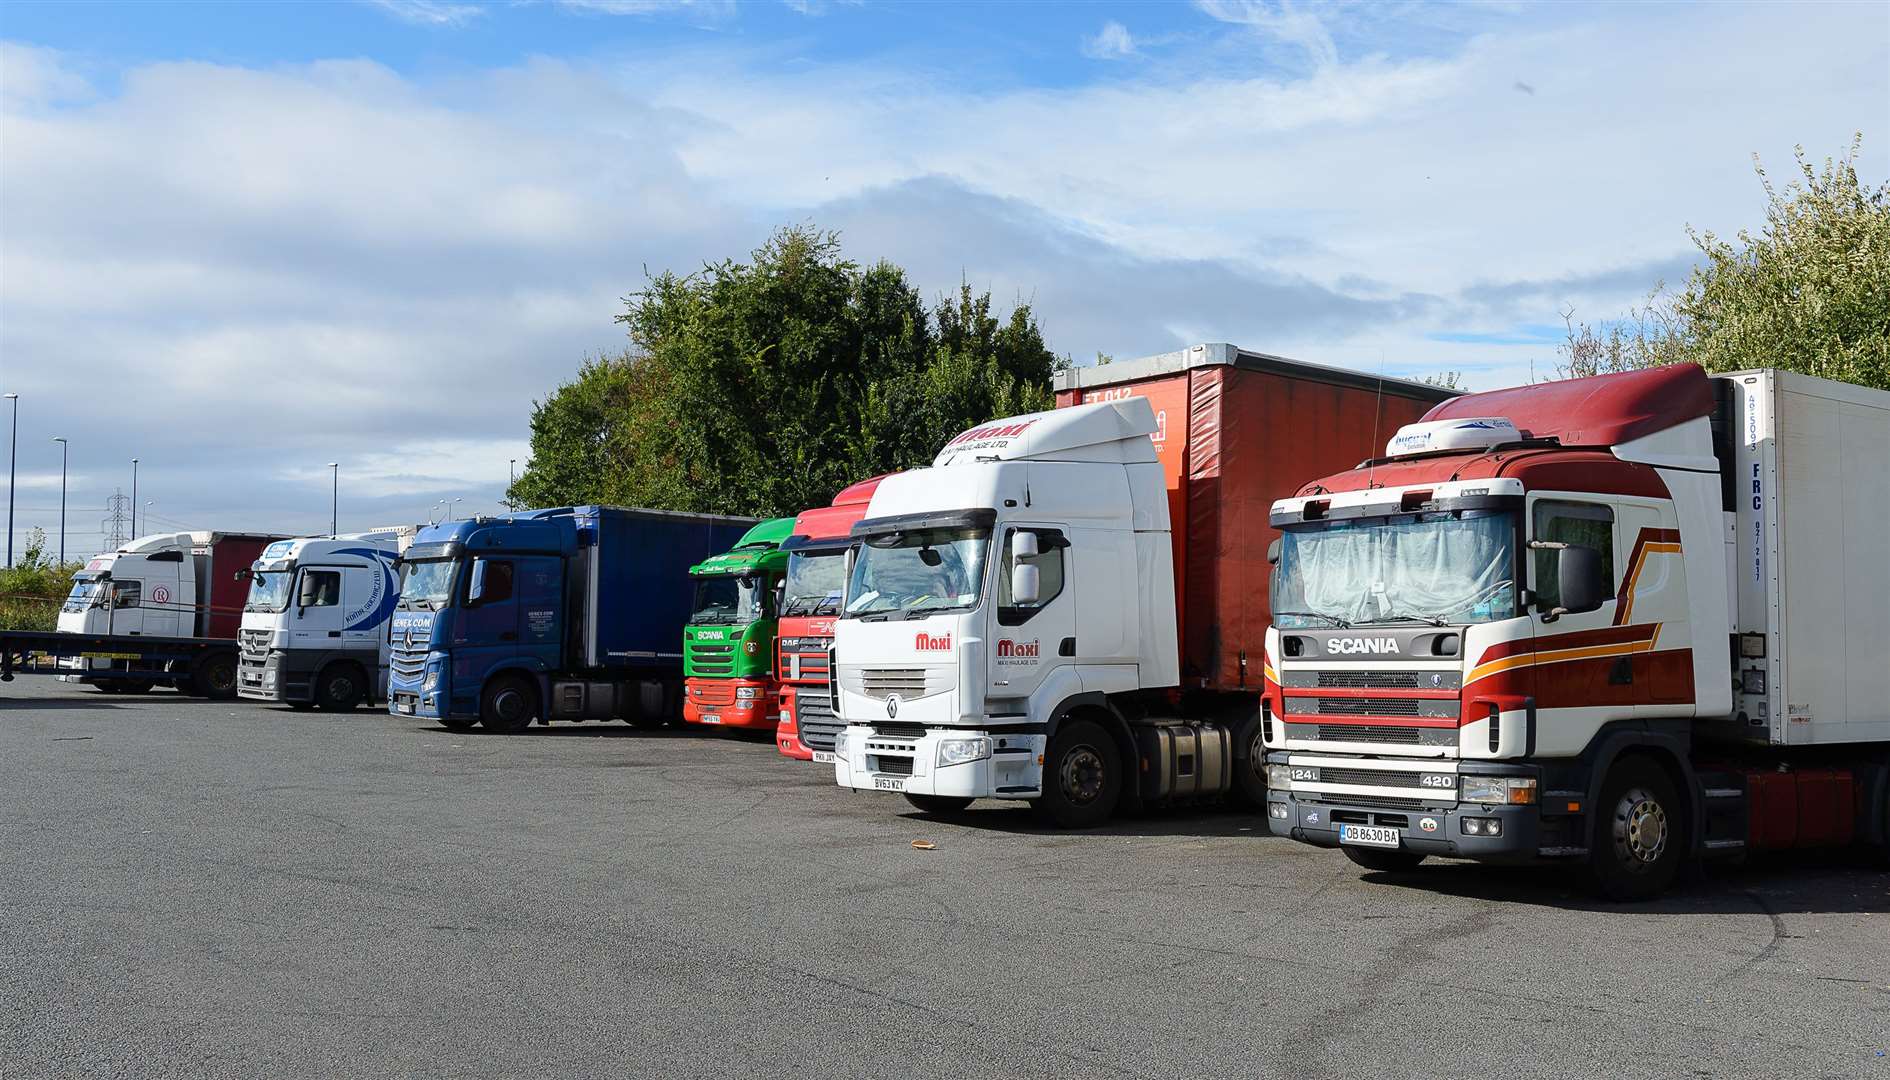 Up to 2,000 lorries could be held on the site